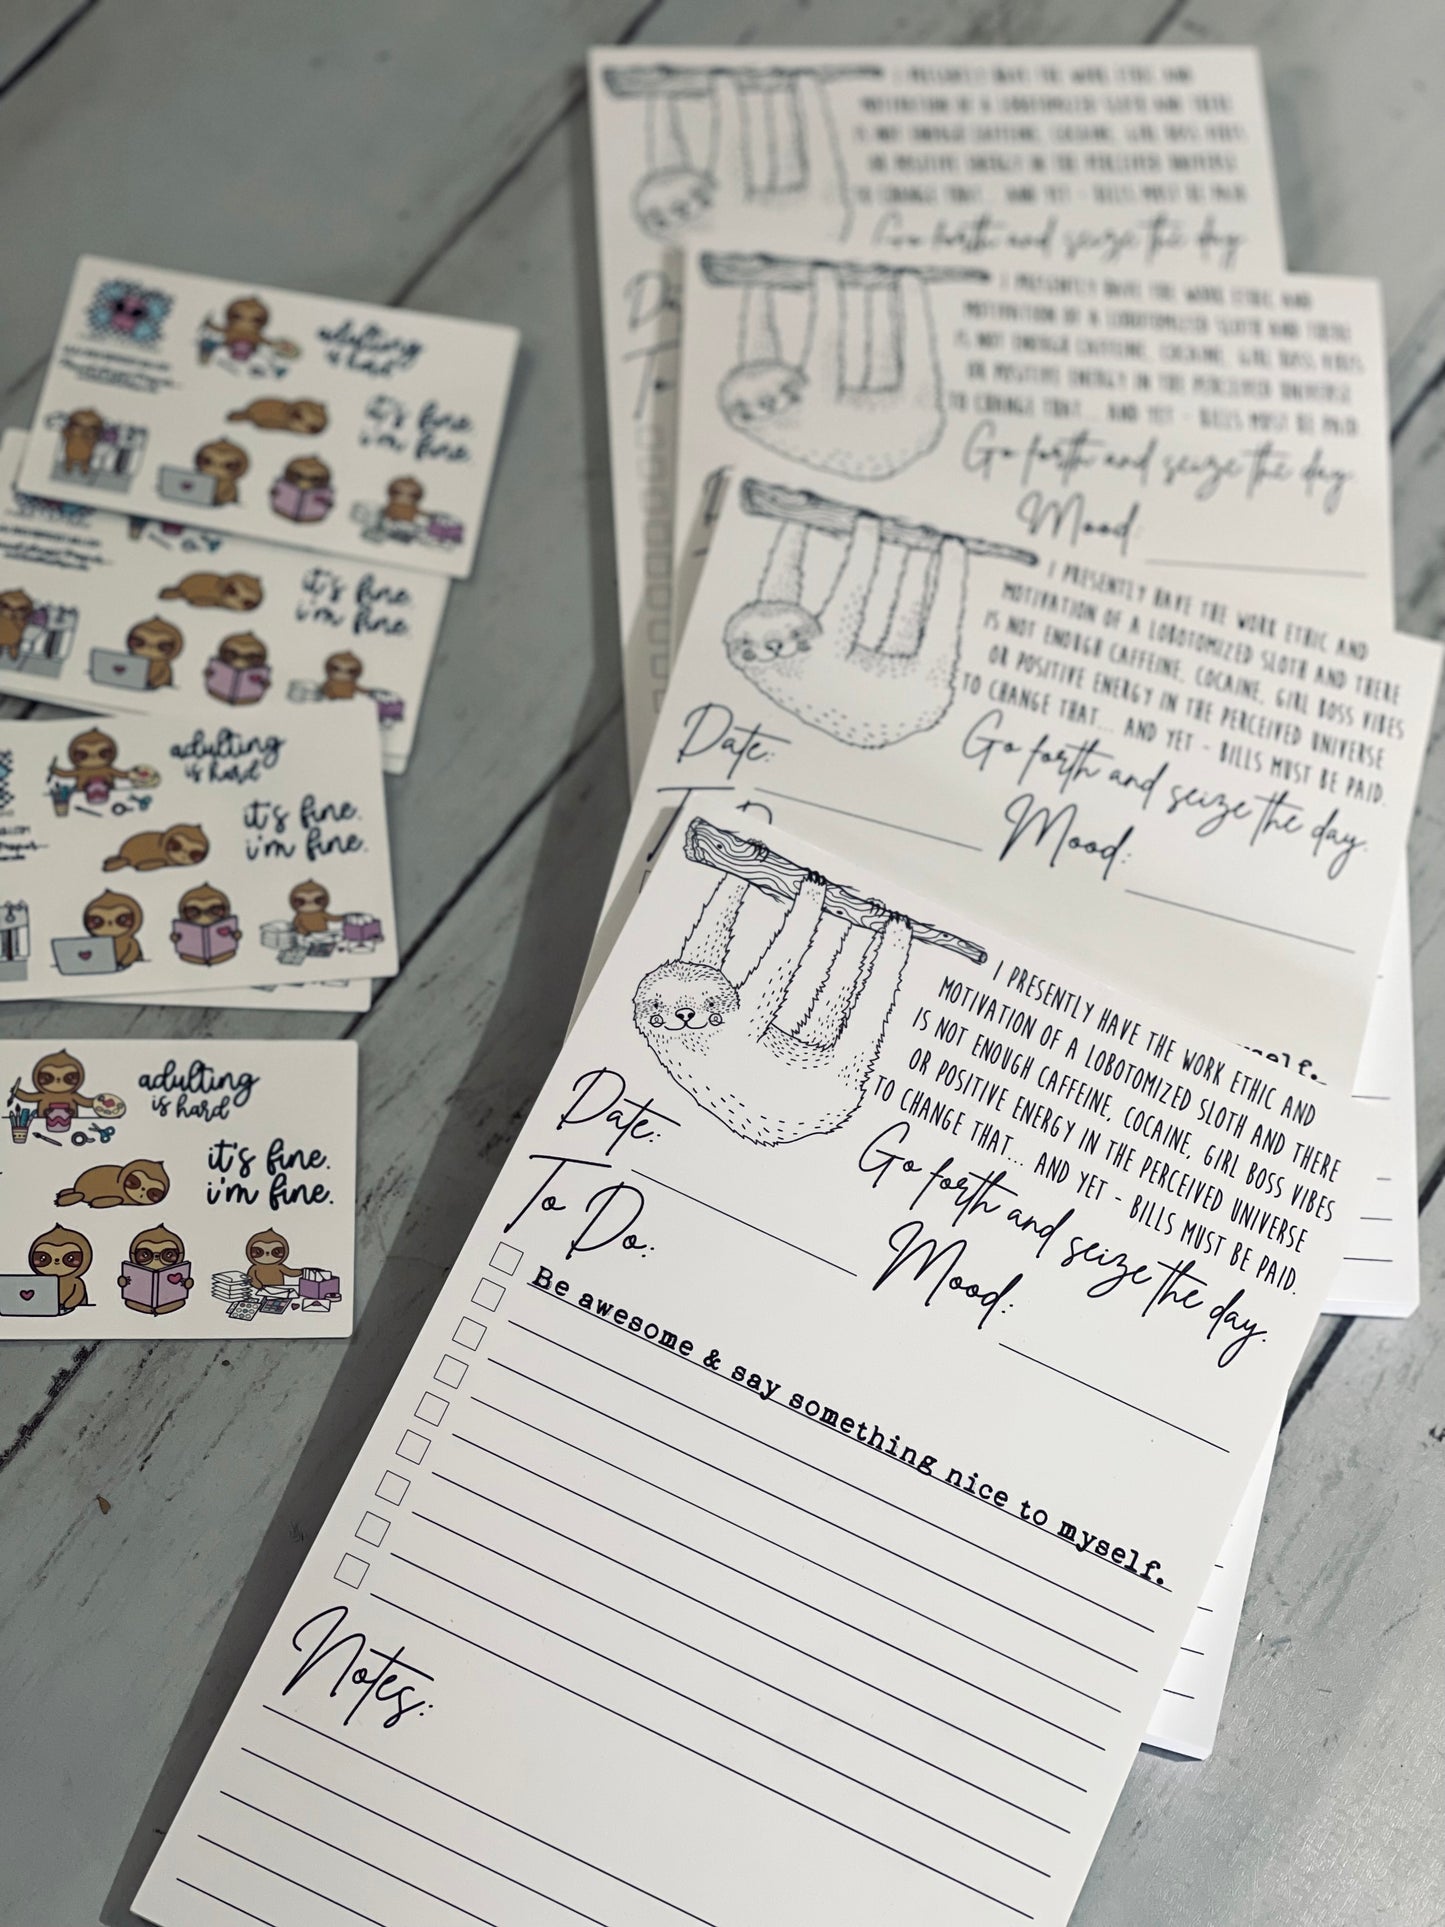 Sloth Work Ethic Paper Pad To Do List and Sticker Sheet - RockerByeDestash Exclusive Swag retail